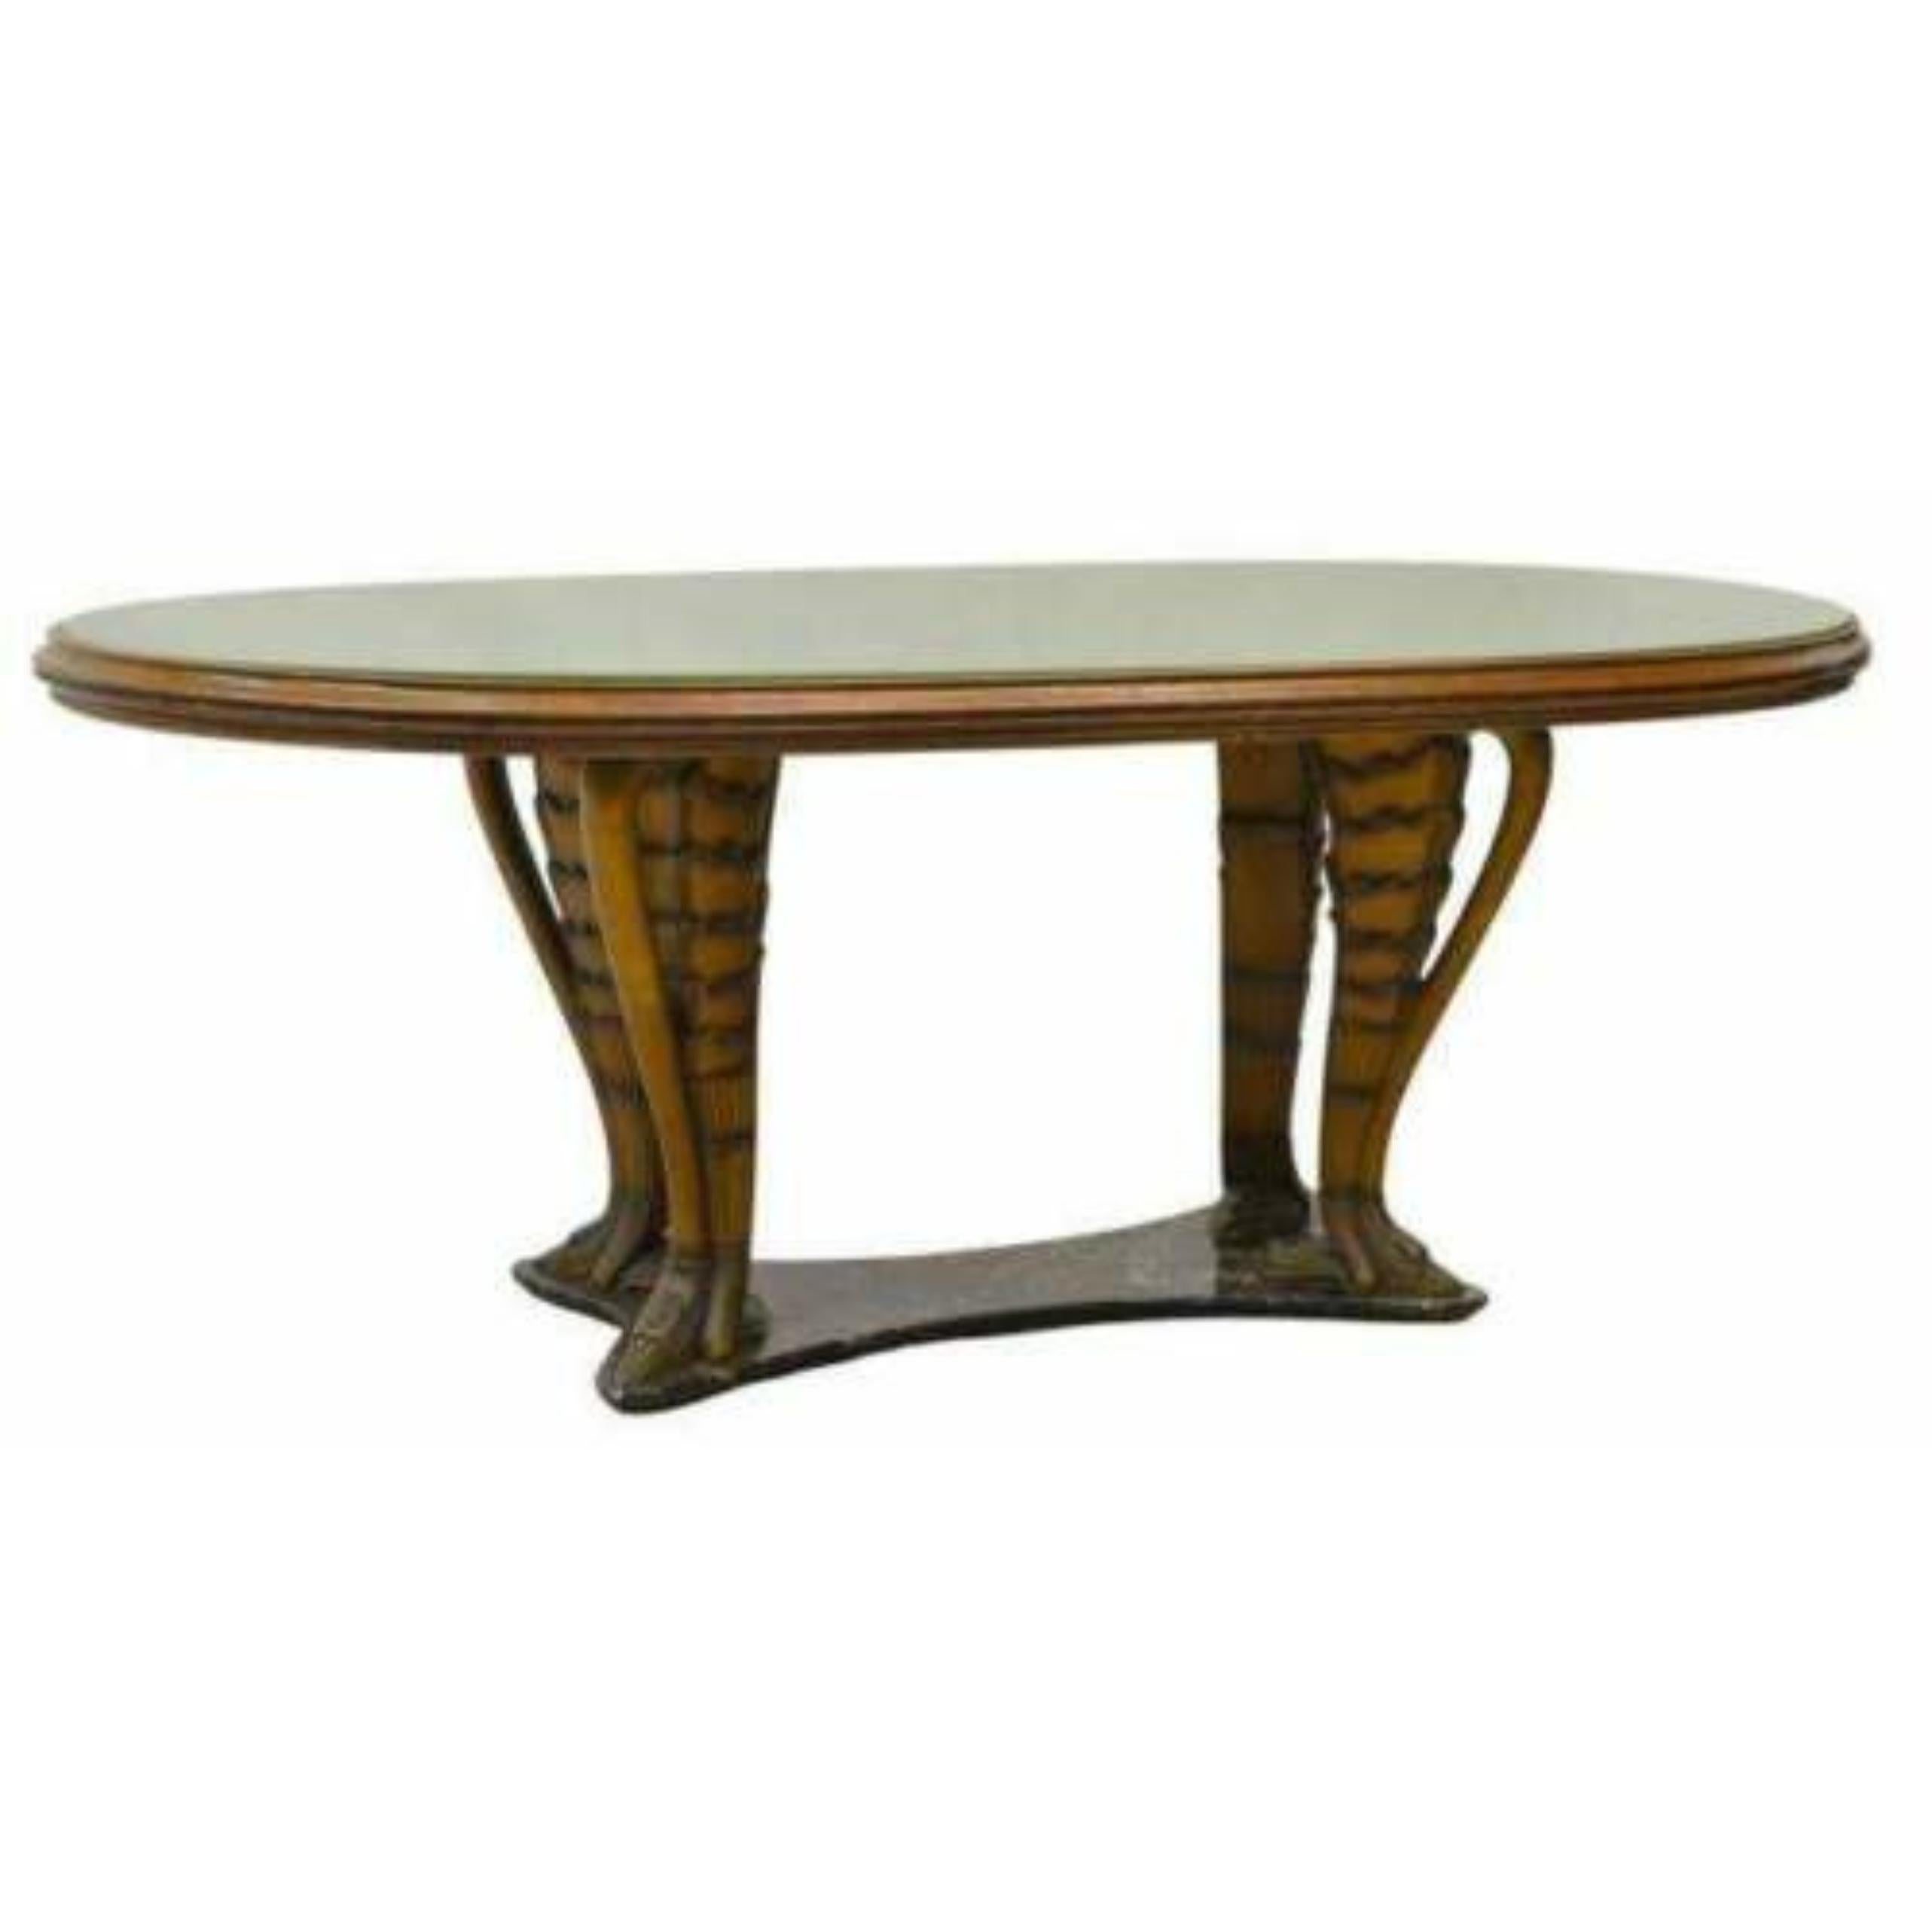 Gorgeous Table, Dining, Vintage, Italian Mid Century Modern Glass Top, Vittorio Dassi!!

This elegant dining table is a beautiful example of mid-century Italian design. The sleek lines and use of wood, glass, and marble make this piece a true work